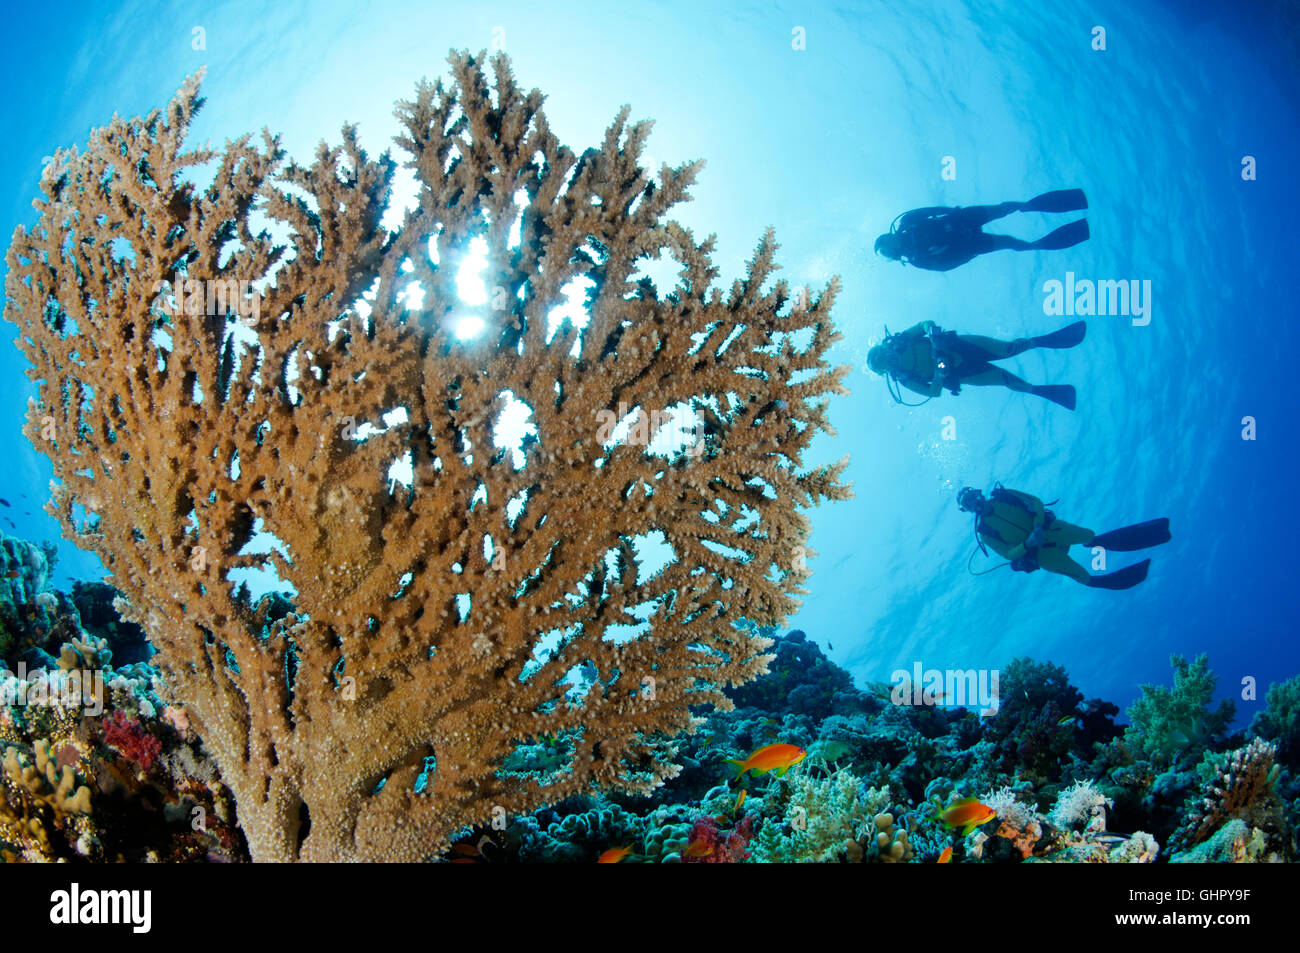 Acropora sp., stone coral reef and scuba diver, Paradise Reef, Red Sea, Egypt, Africa Stock Photo